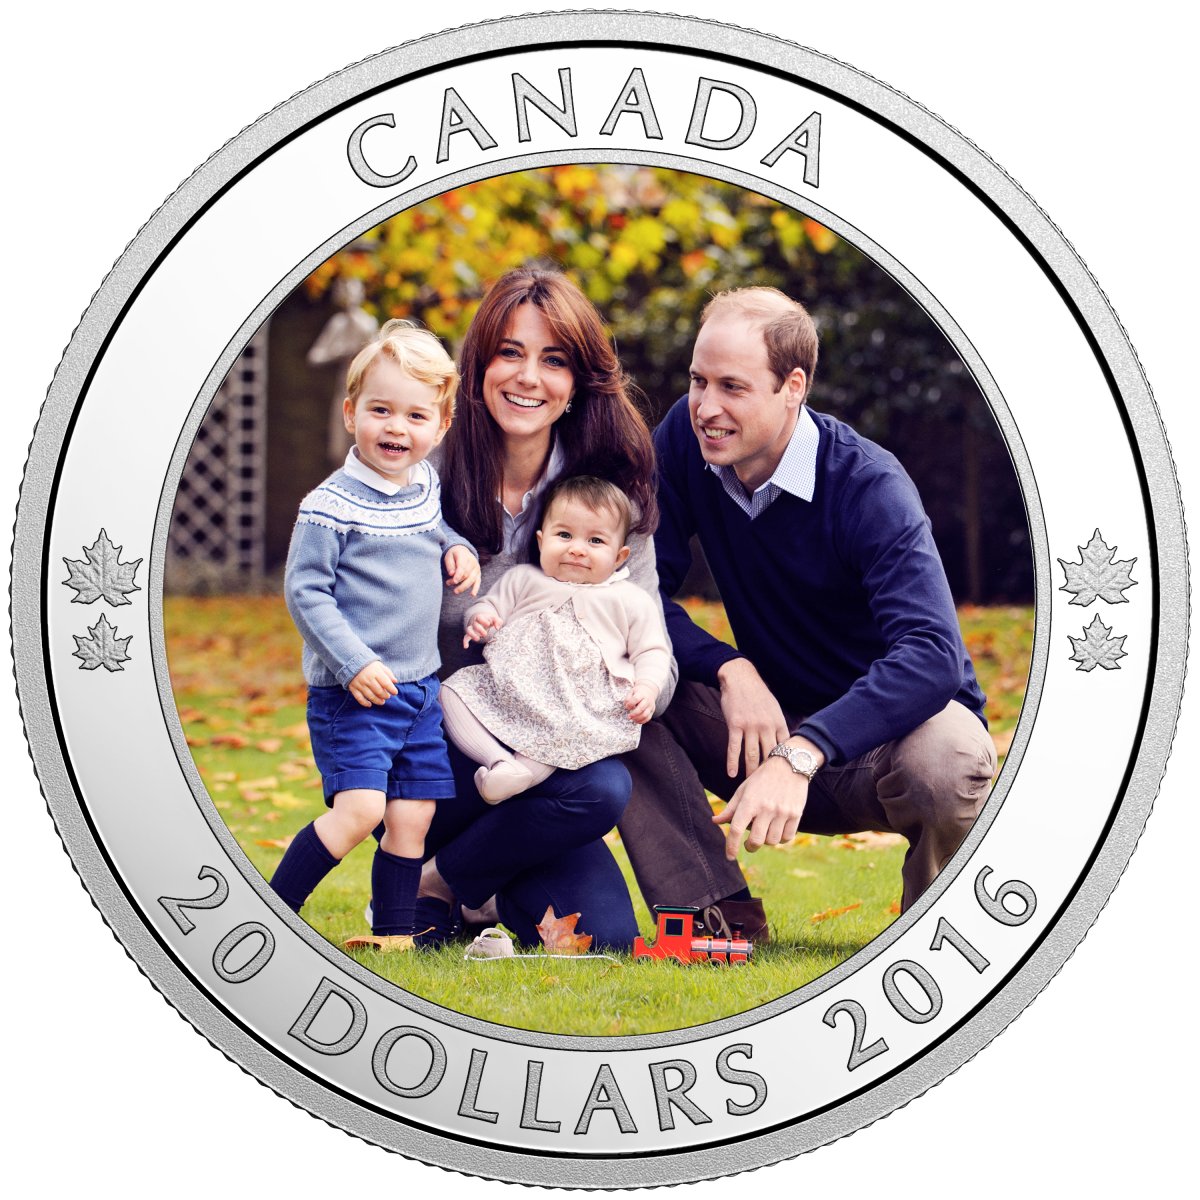 The Royal Canadian Mint unveiled a new limited edition coin featuring the royal family to celebrate their second visit to Canada.